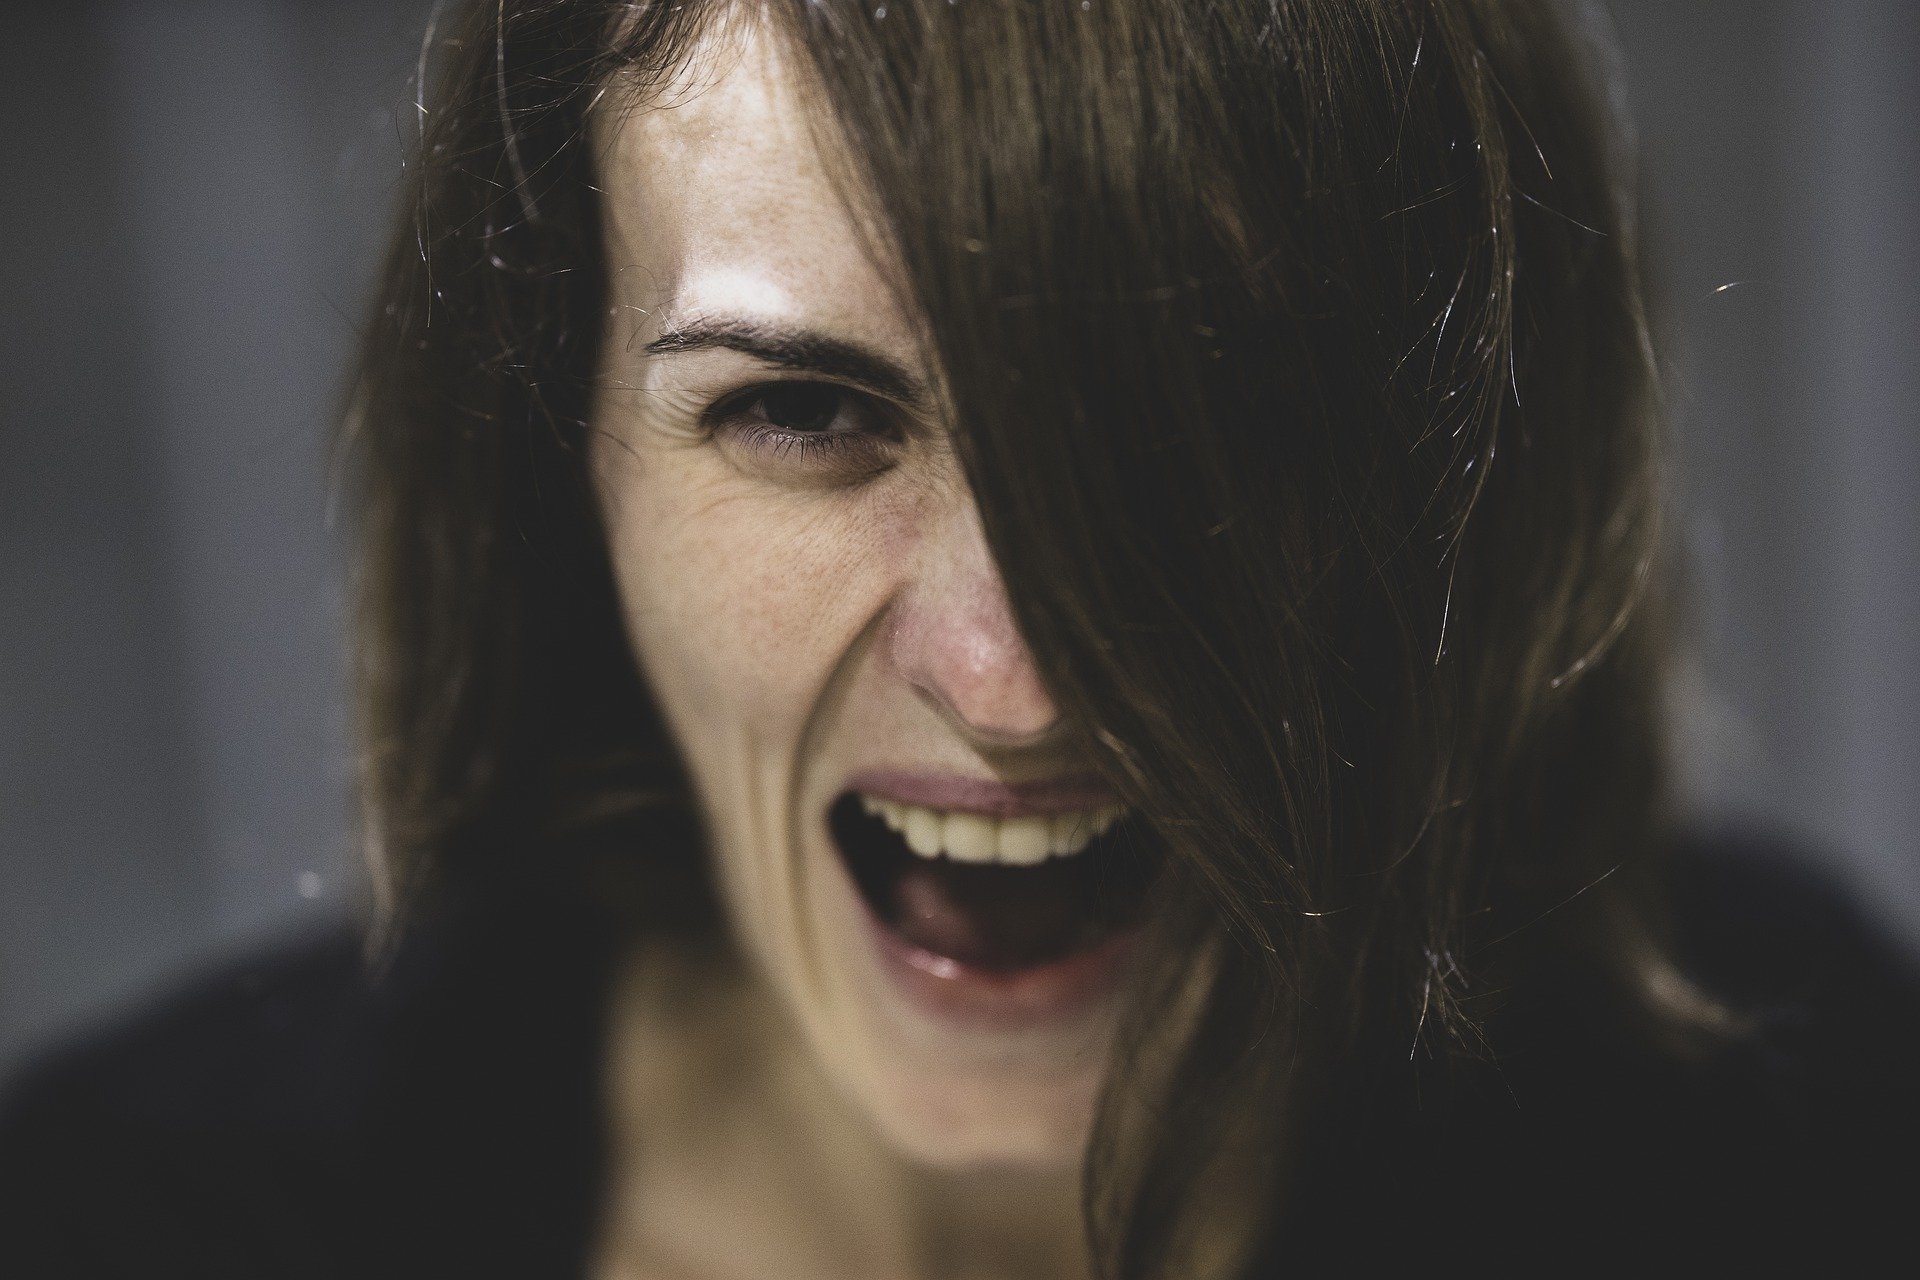 A headshot of a woman shouting with her mouth wide open | Photo: Pixabay/Engin Akyurt